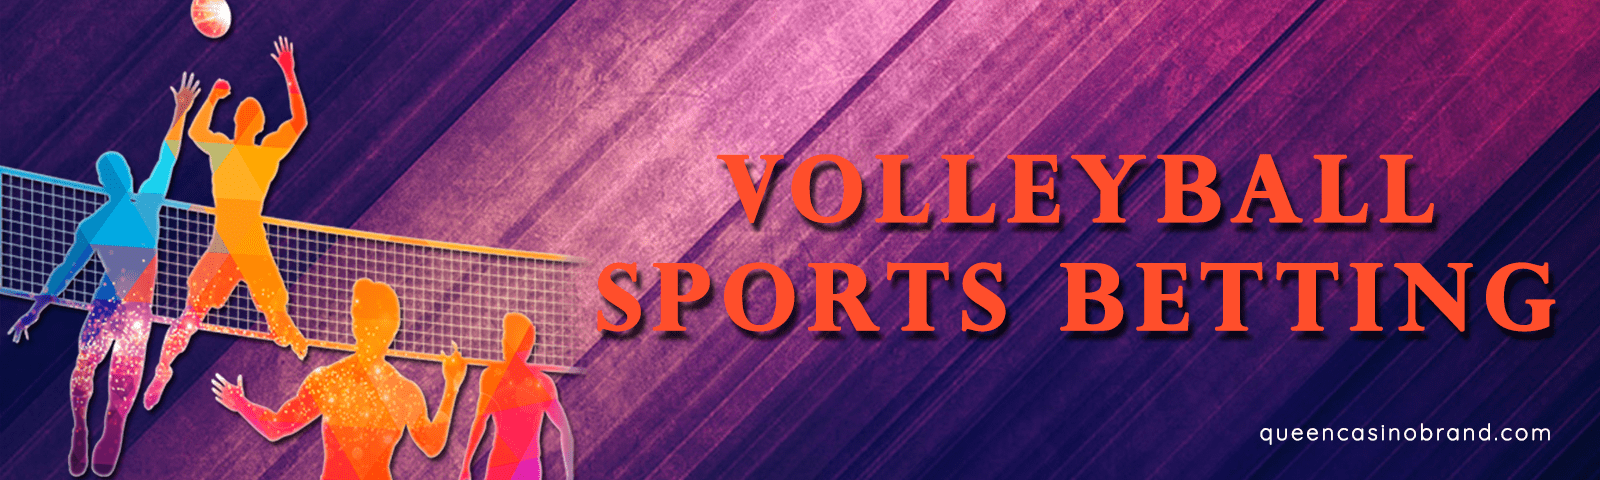 Volleyball Sports Betting in Japan